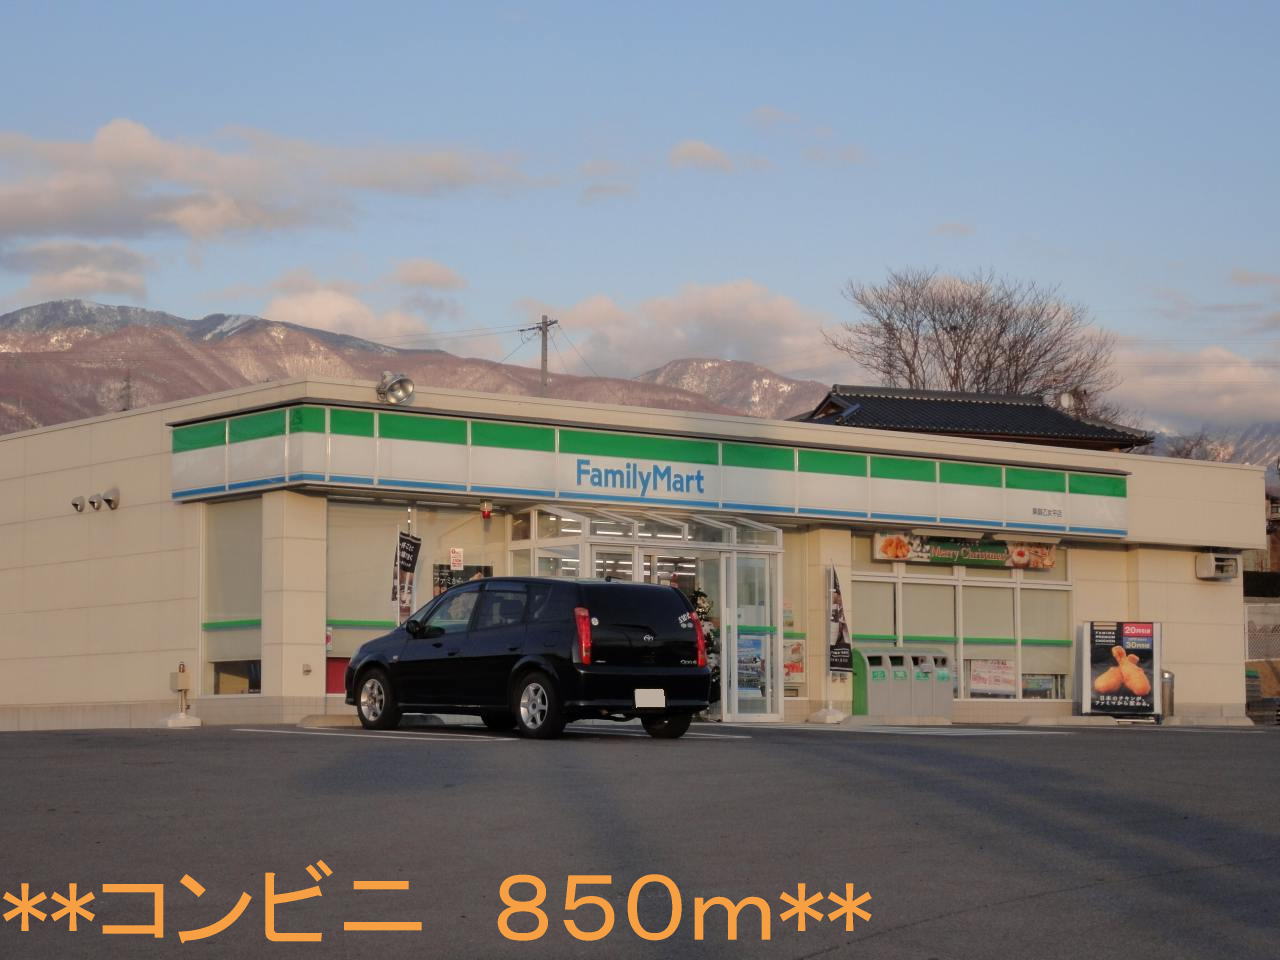 Convenience store. FamilyMart east your maiden Hiramise (convenience store) to 850m